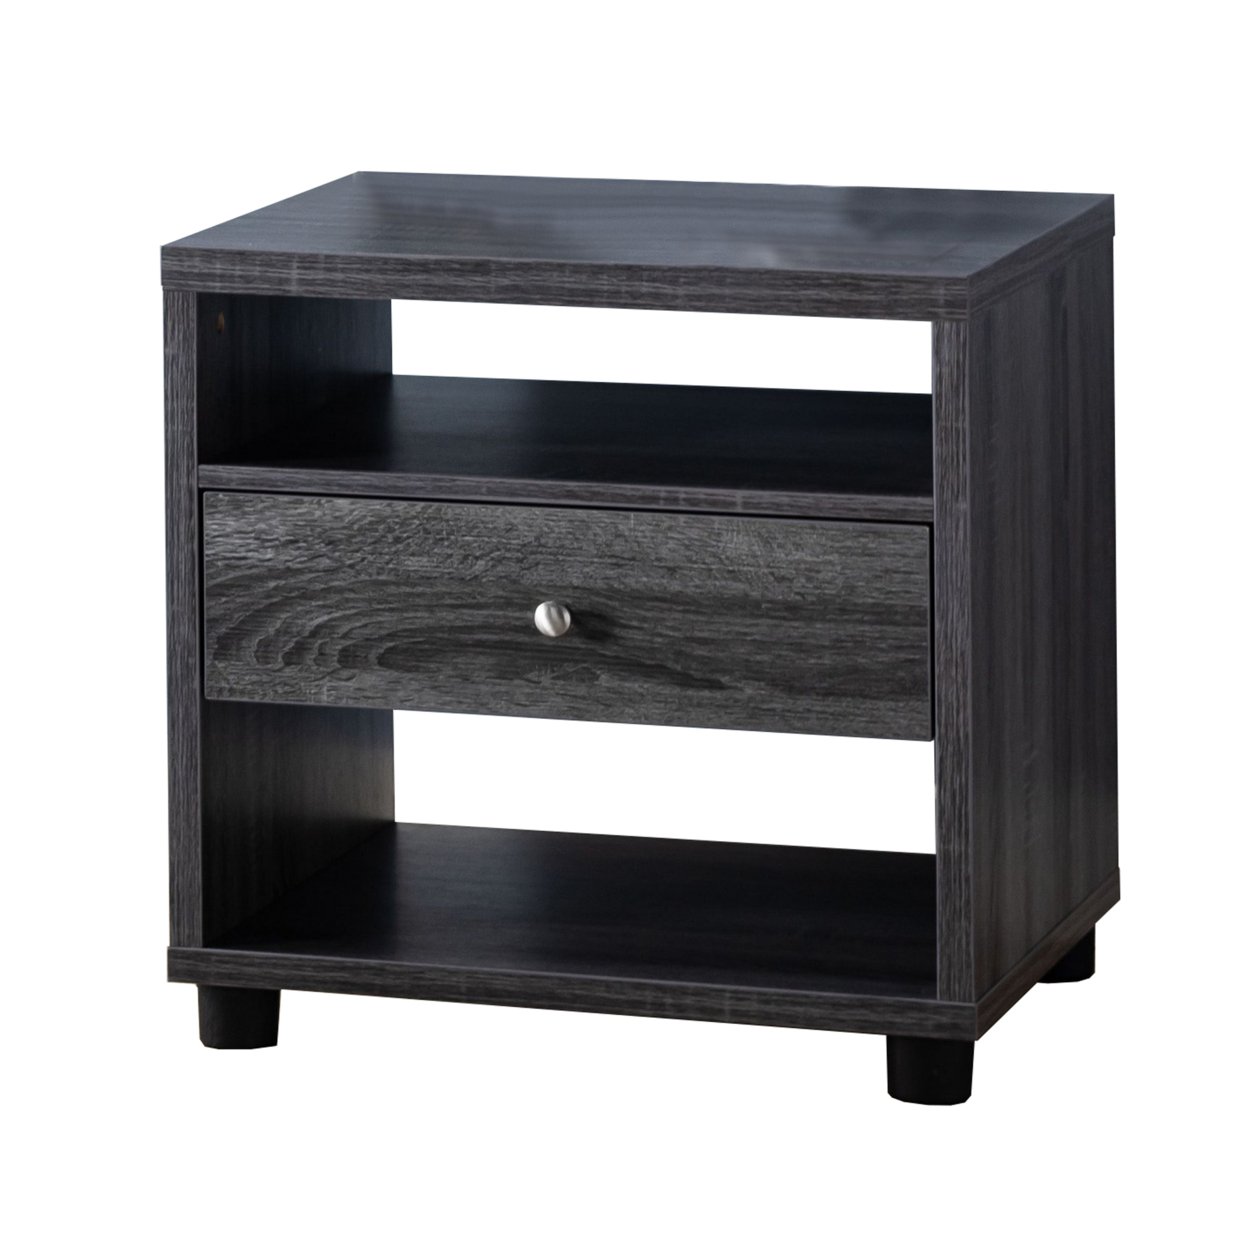 1 Drawer Wooden End Table With 2 Open Shelves, Gray- Saltoro Sherpi